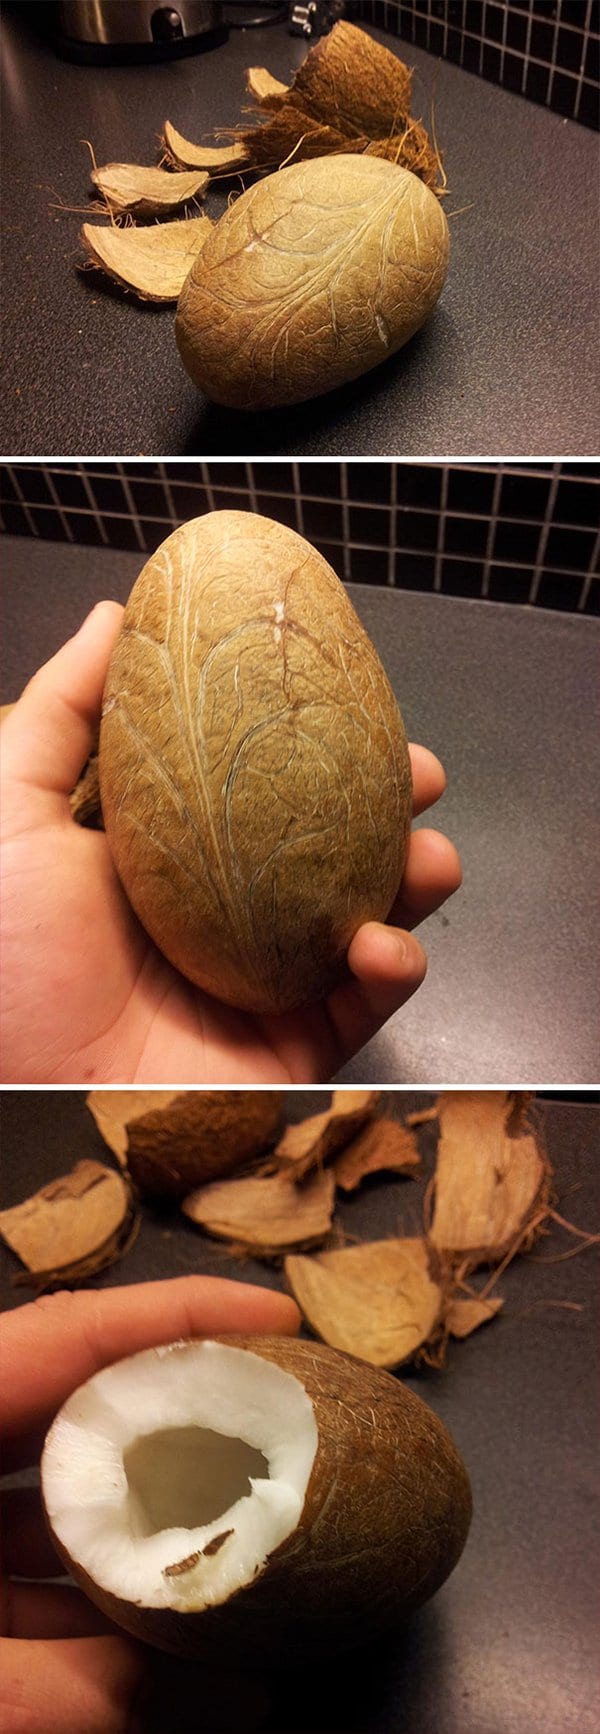 Pictures Of Peeled Fruit coconut